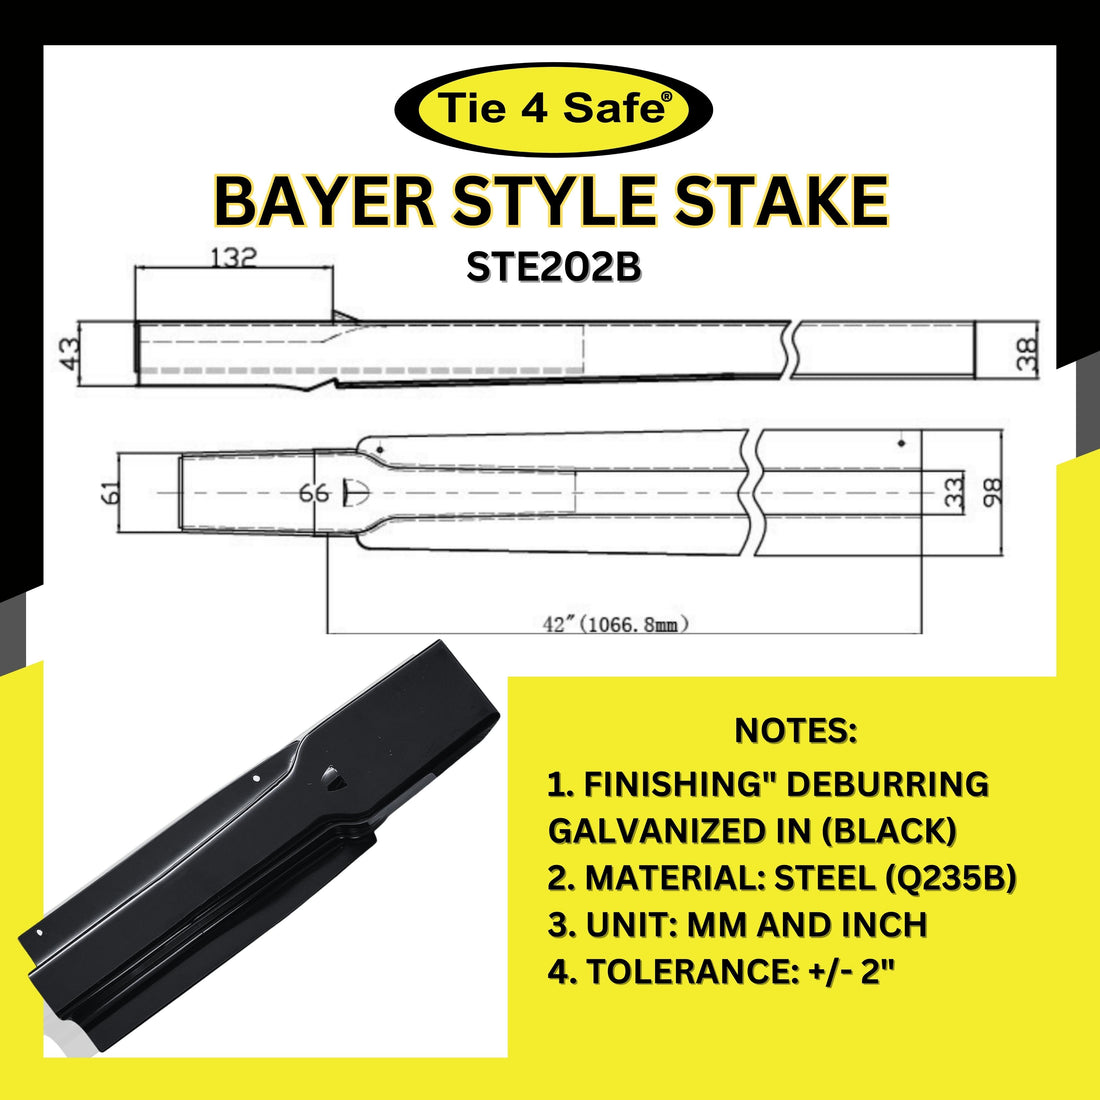 Bayer Style Stakes for Stake Trucks Flatbeds and Trailers